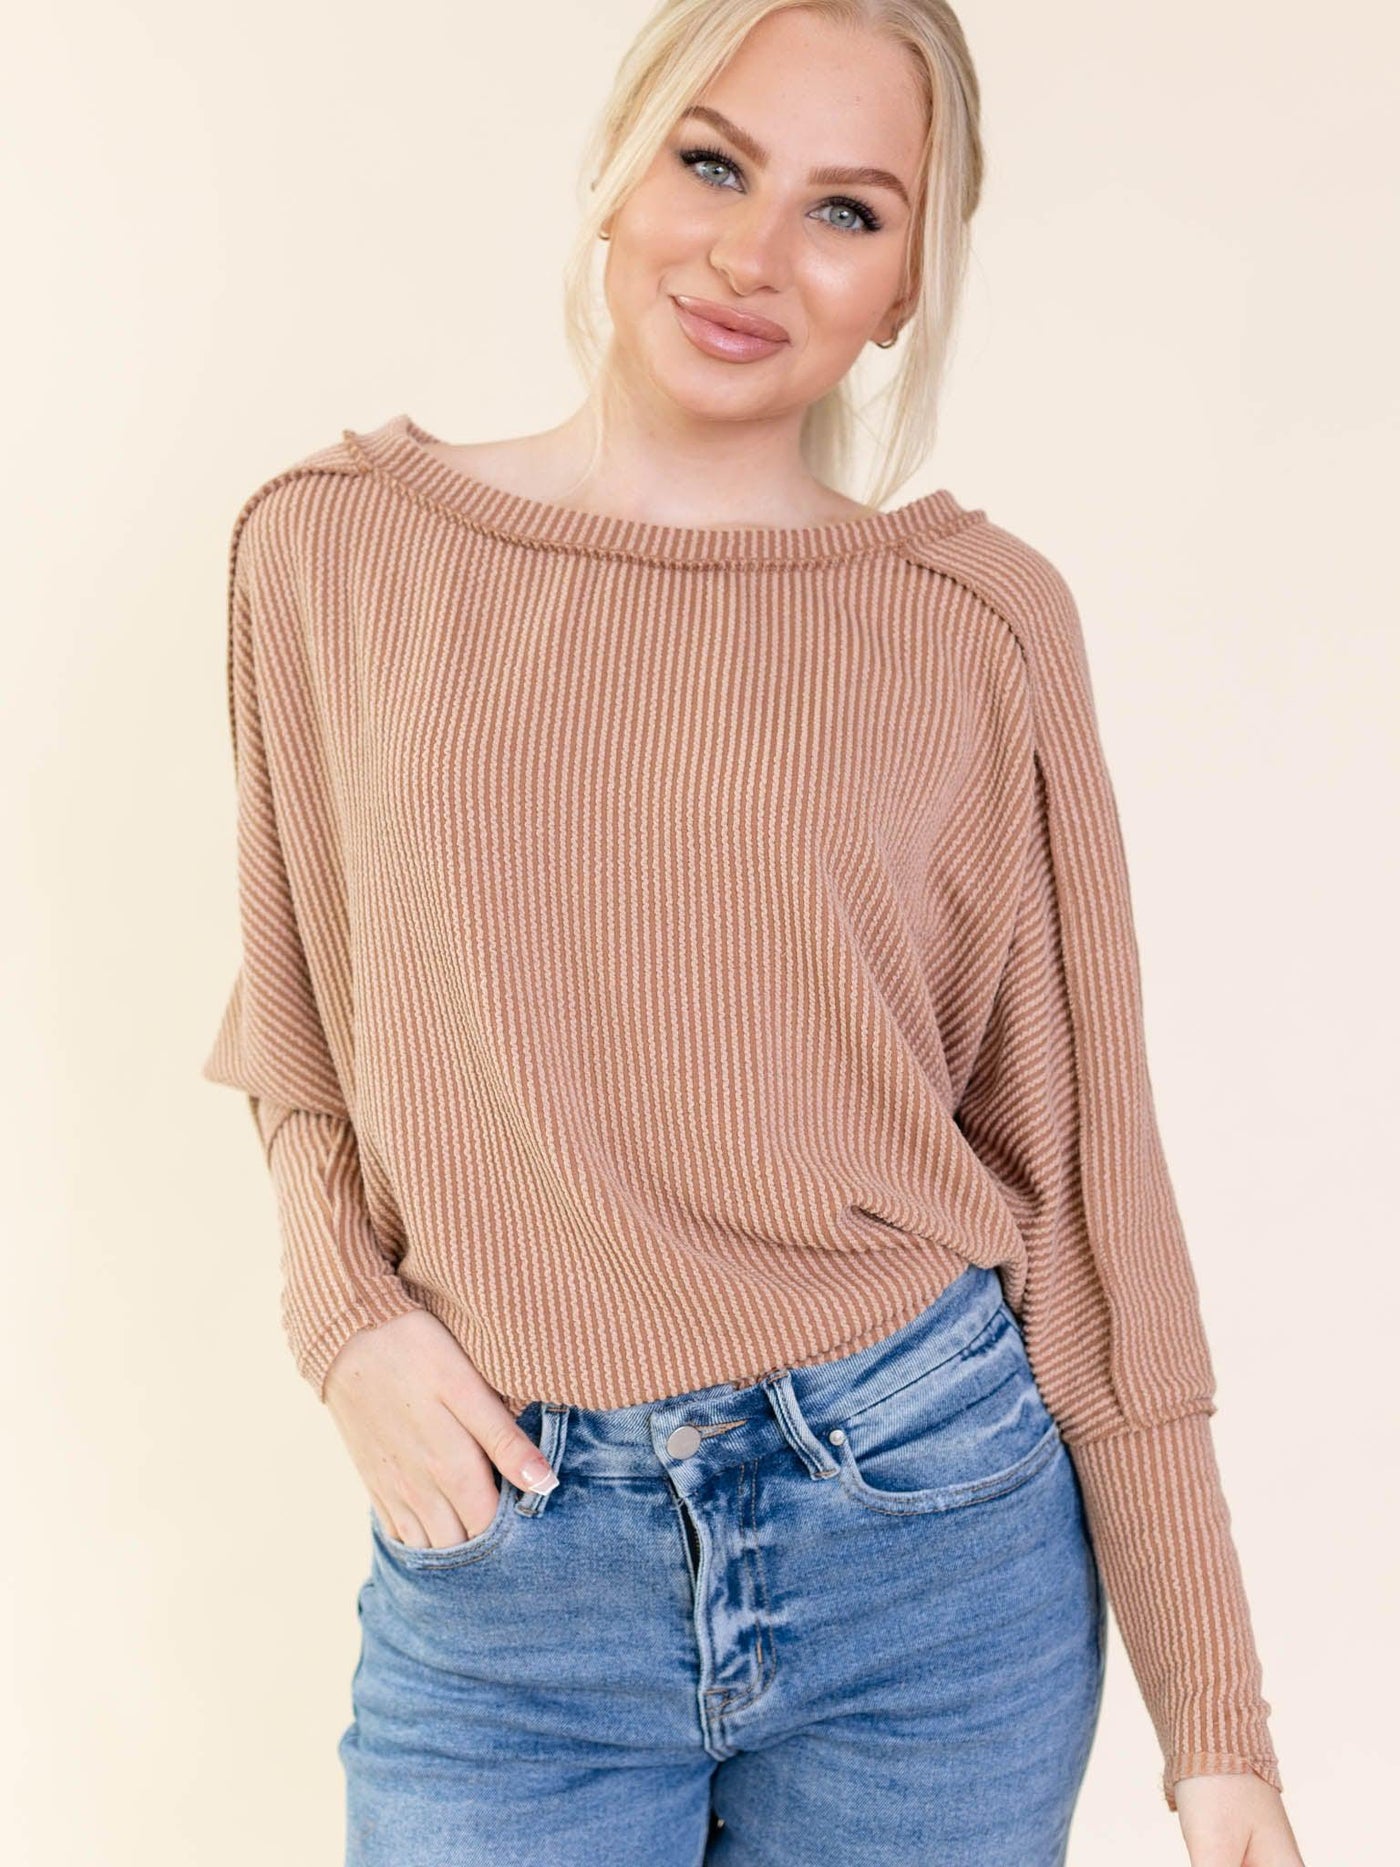 slouchy textured top